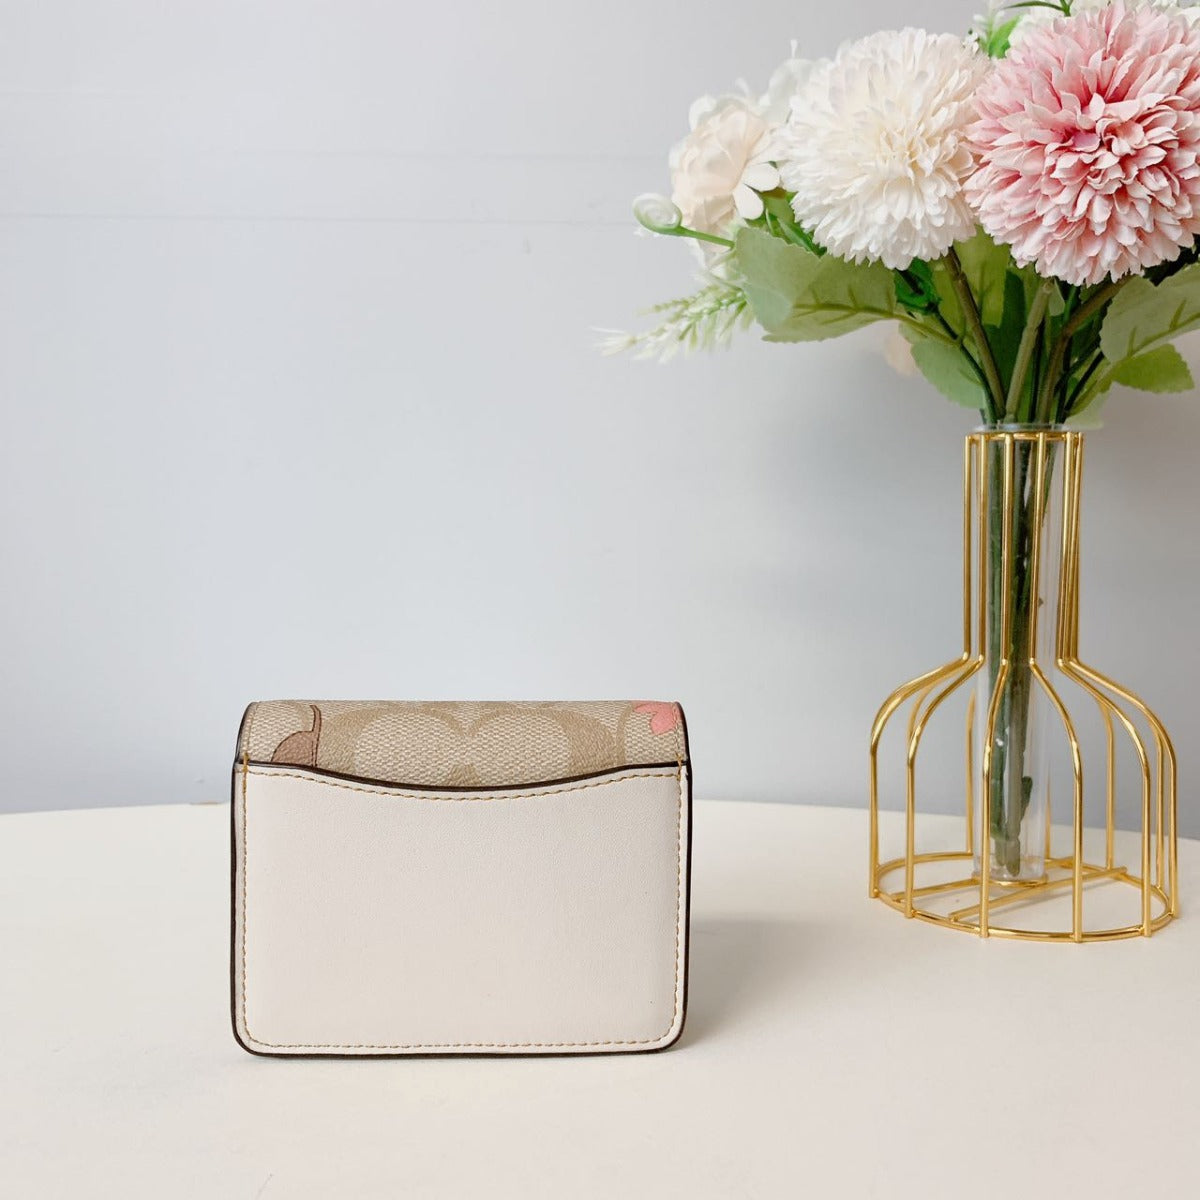 Coach CH714 Mini Wallet On A Chain In Signature Canvas With Floral Cluster Print IN Light Khaki Multi 195031867279